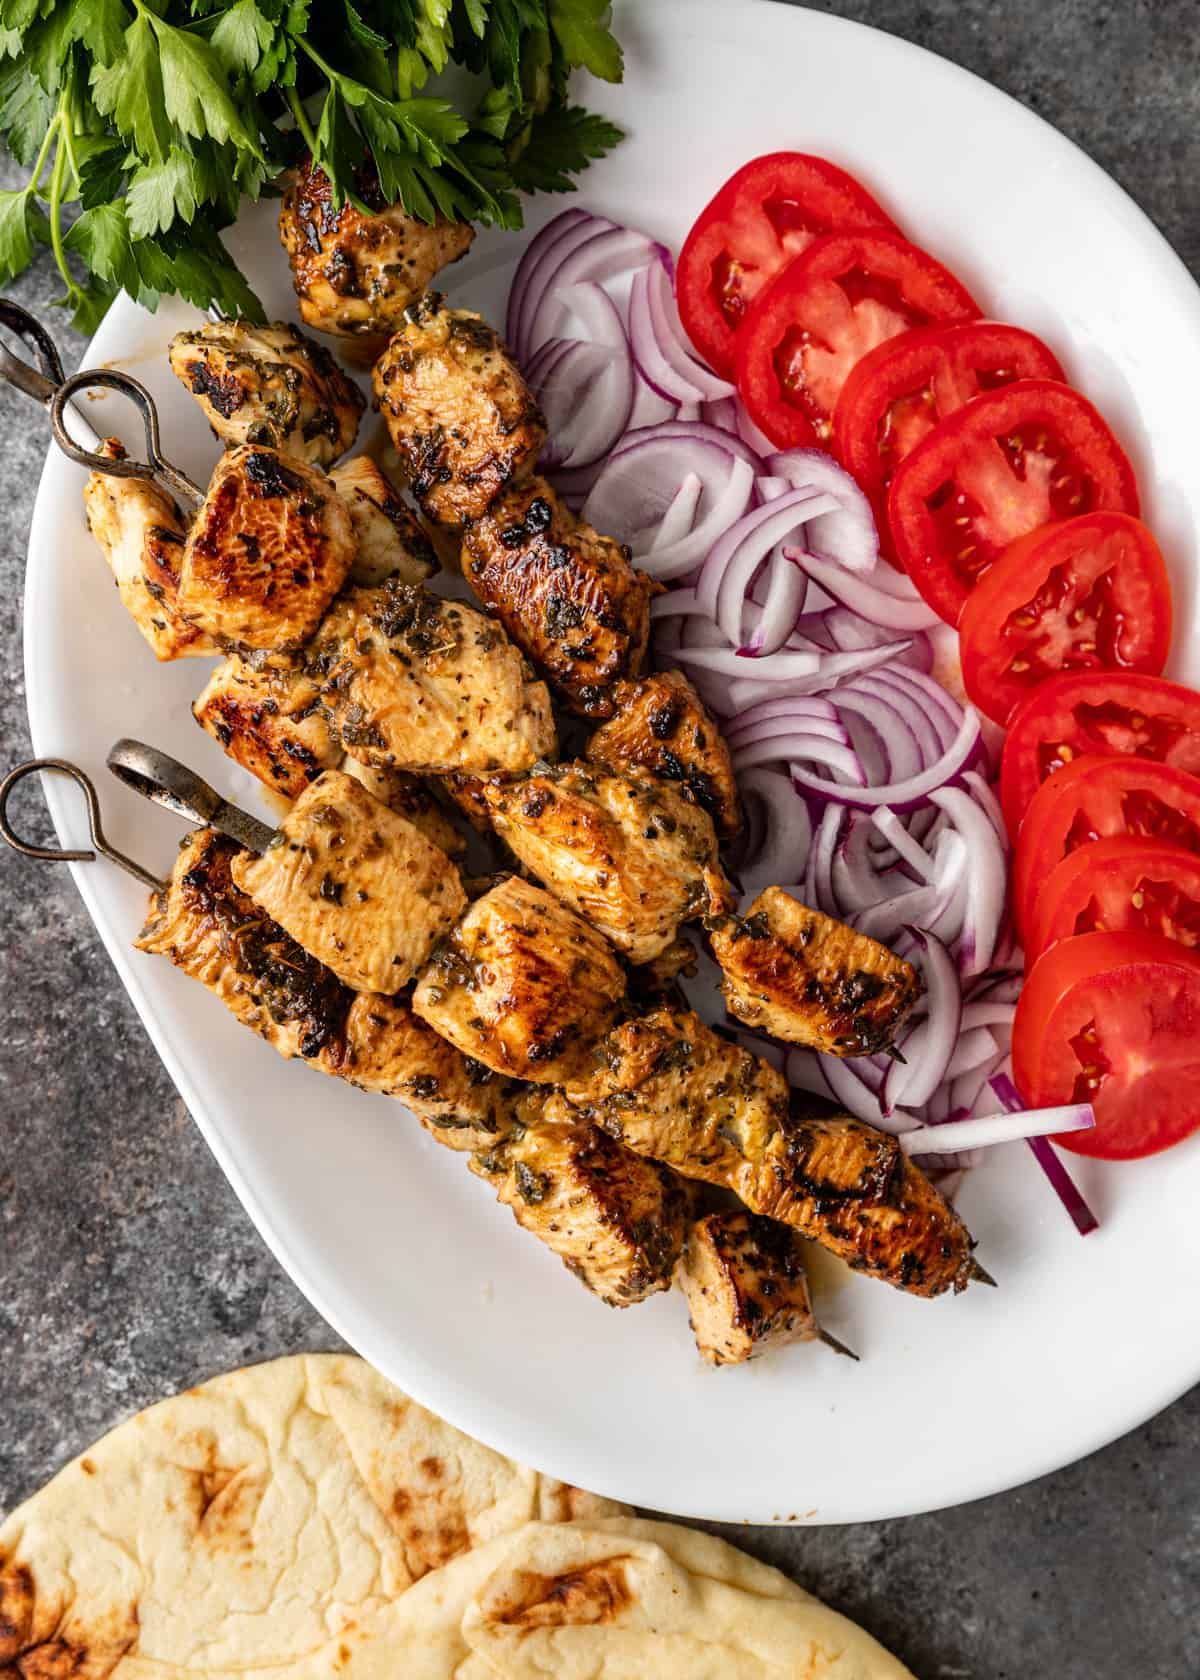 overhead: white platter with grilled chicken on skewers, red onion slices and tomato slices